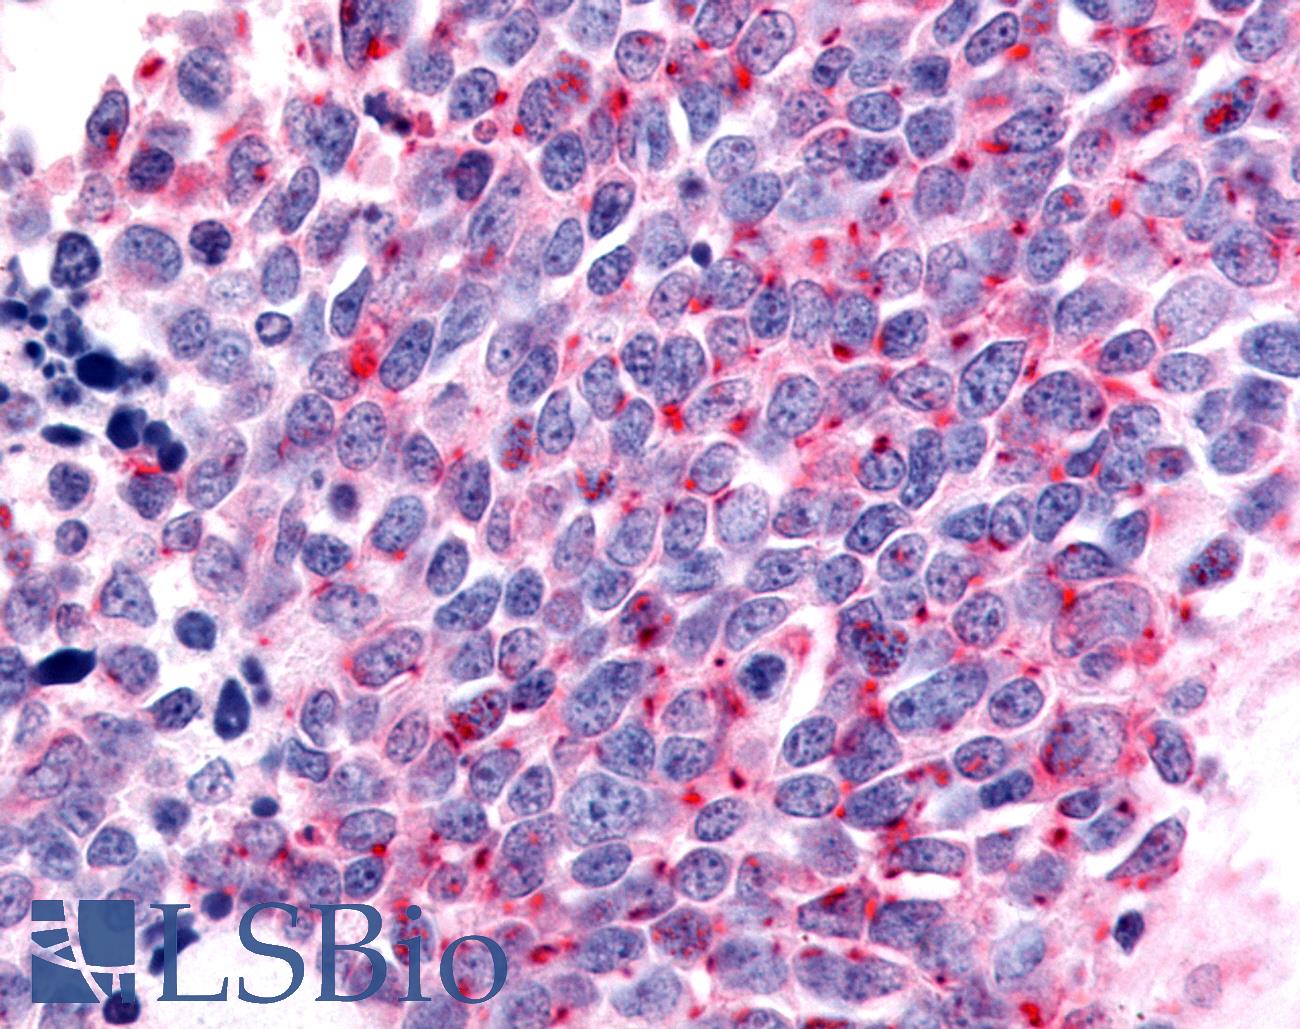 OR6K3 Antibody - Lung, Small Cell Carcinoma